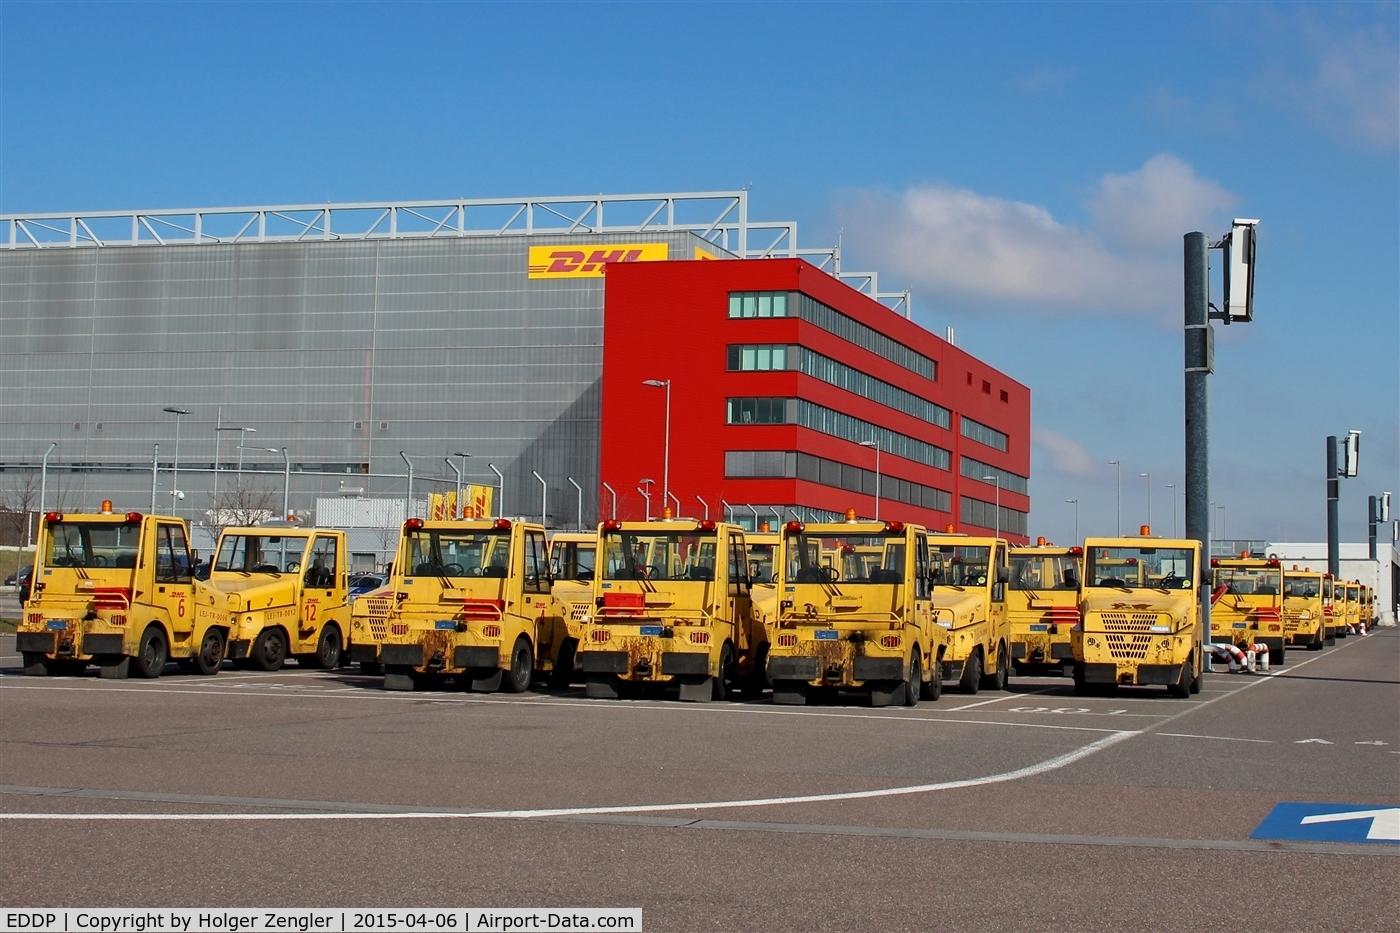 Leipzig/Halle Airport, Leipzig/Halle Germany (EDDP) - Sunday rest even for yellow vehicules...